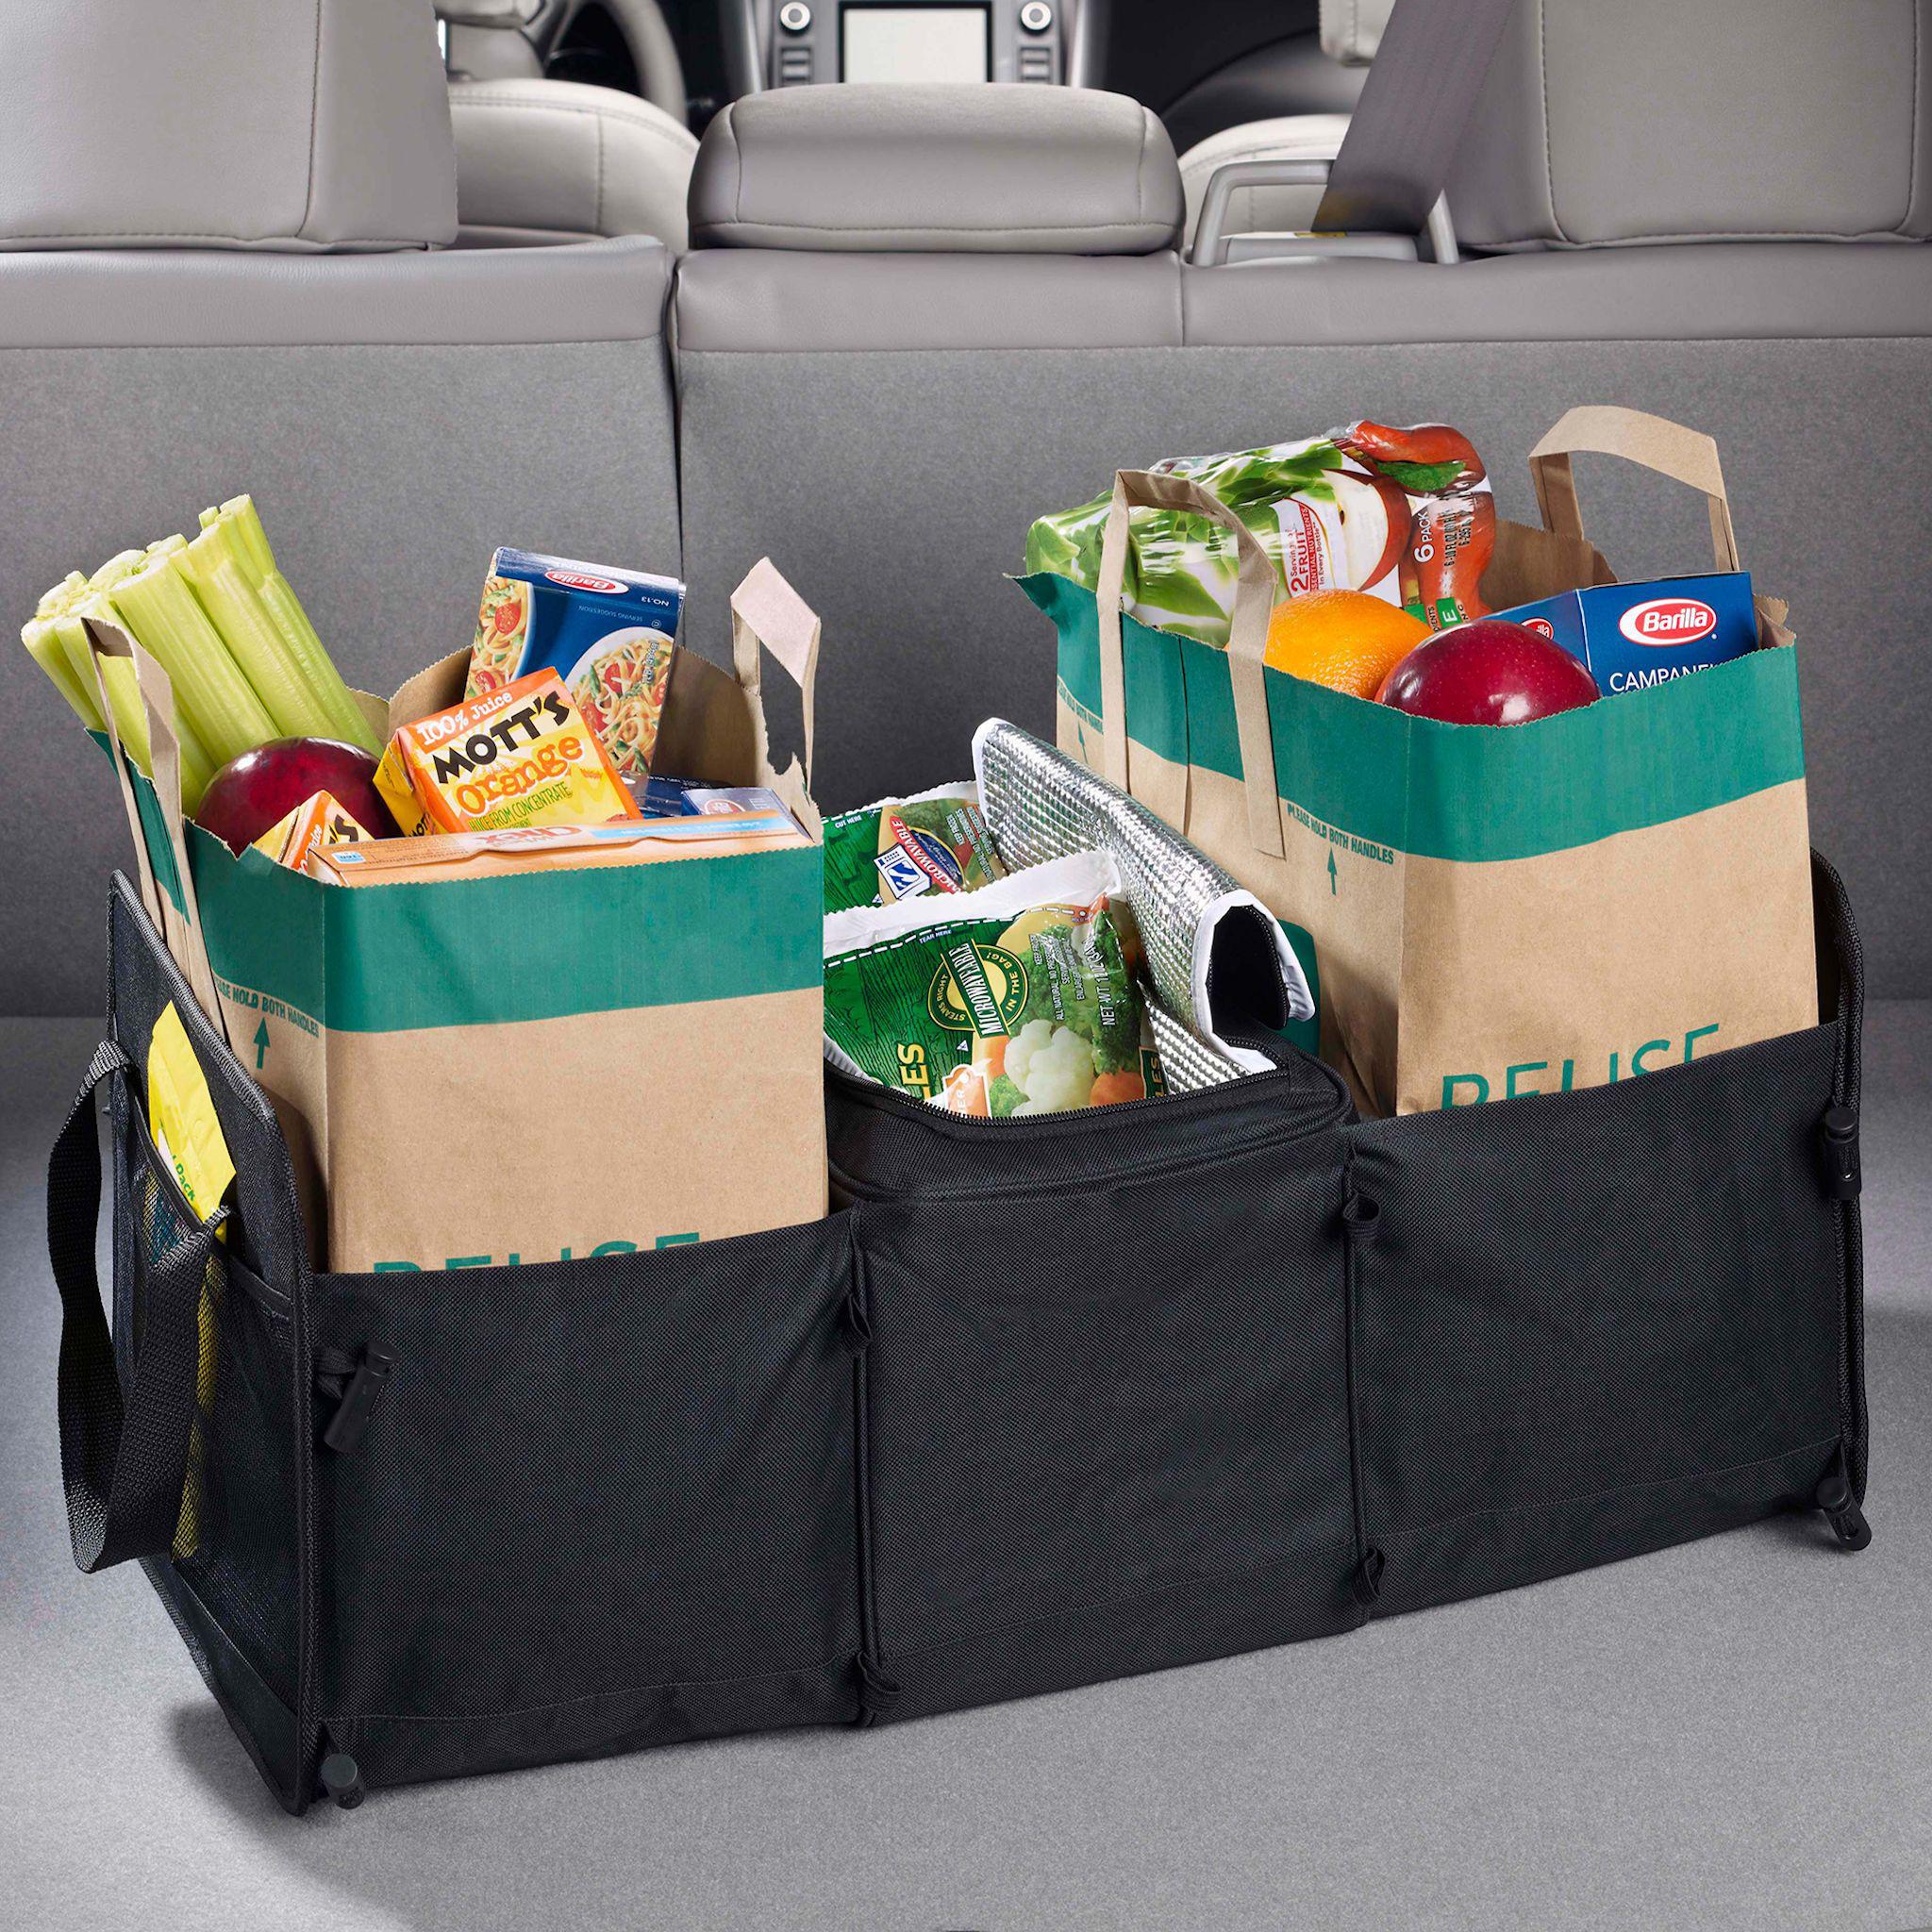 AAA.com  High Road 3-in-1 Cargo and Trunk Organizer with Cooler